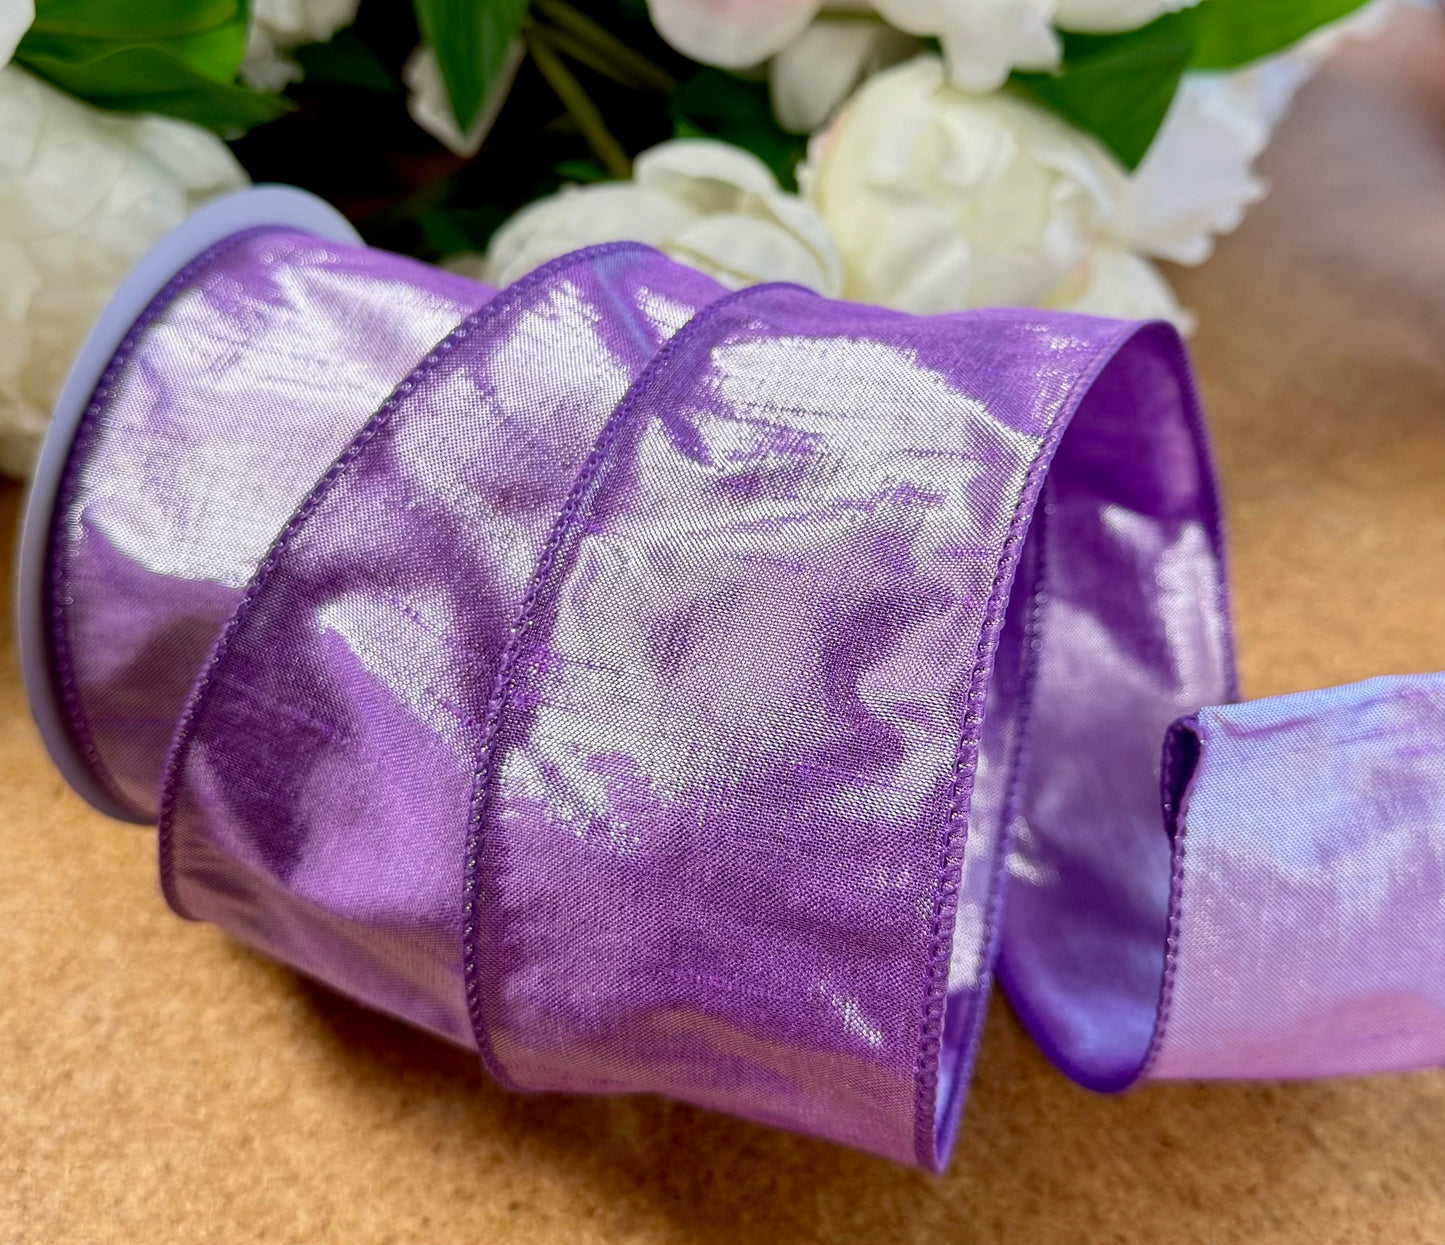 Shiny Lavender Ribbon 2.5 Inches by 10 Yards